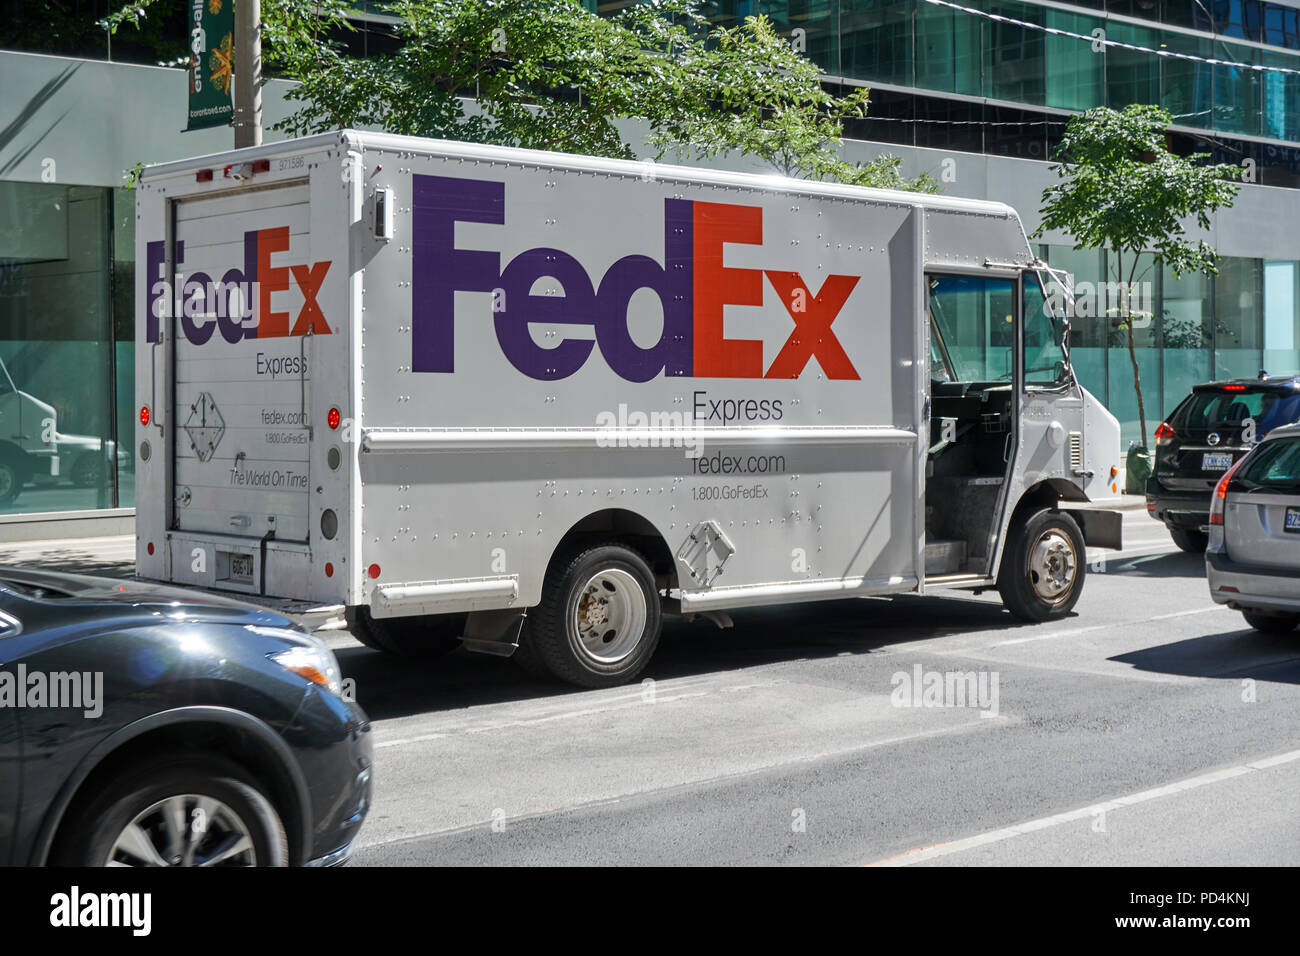 TORONTO, CANADA - JULY 15, 2018: FedEx truck on a Toronto street, Ontario, Canada. FedEx Corporation is an American multinational courier delivery ser Stock Photo